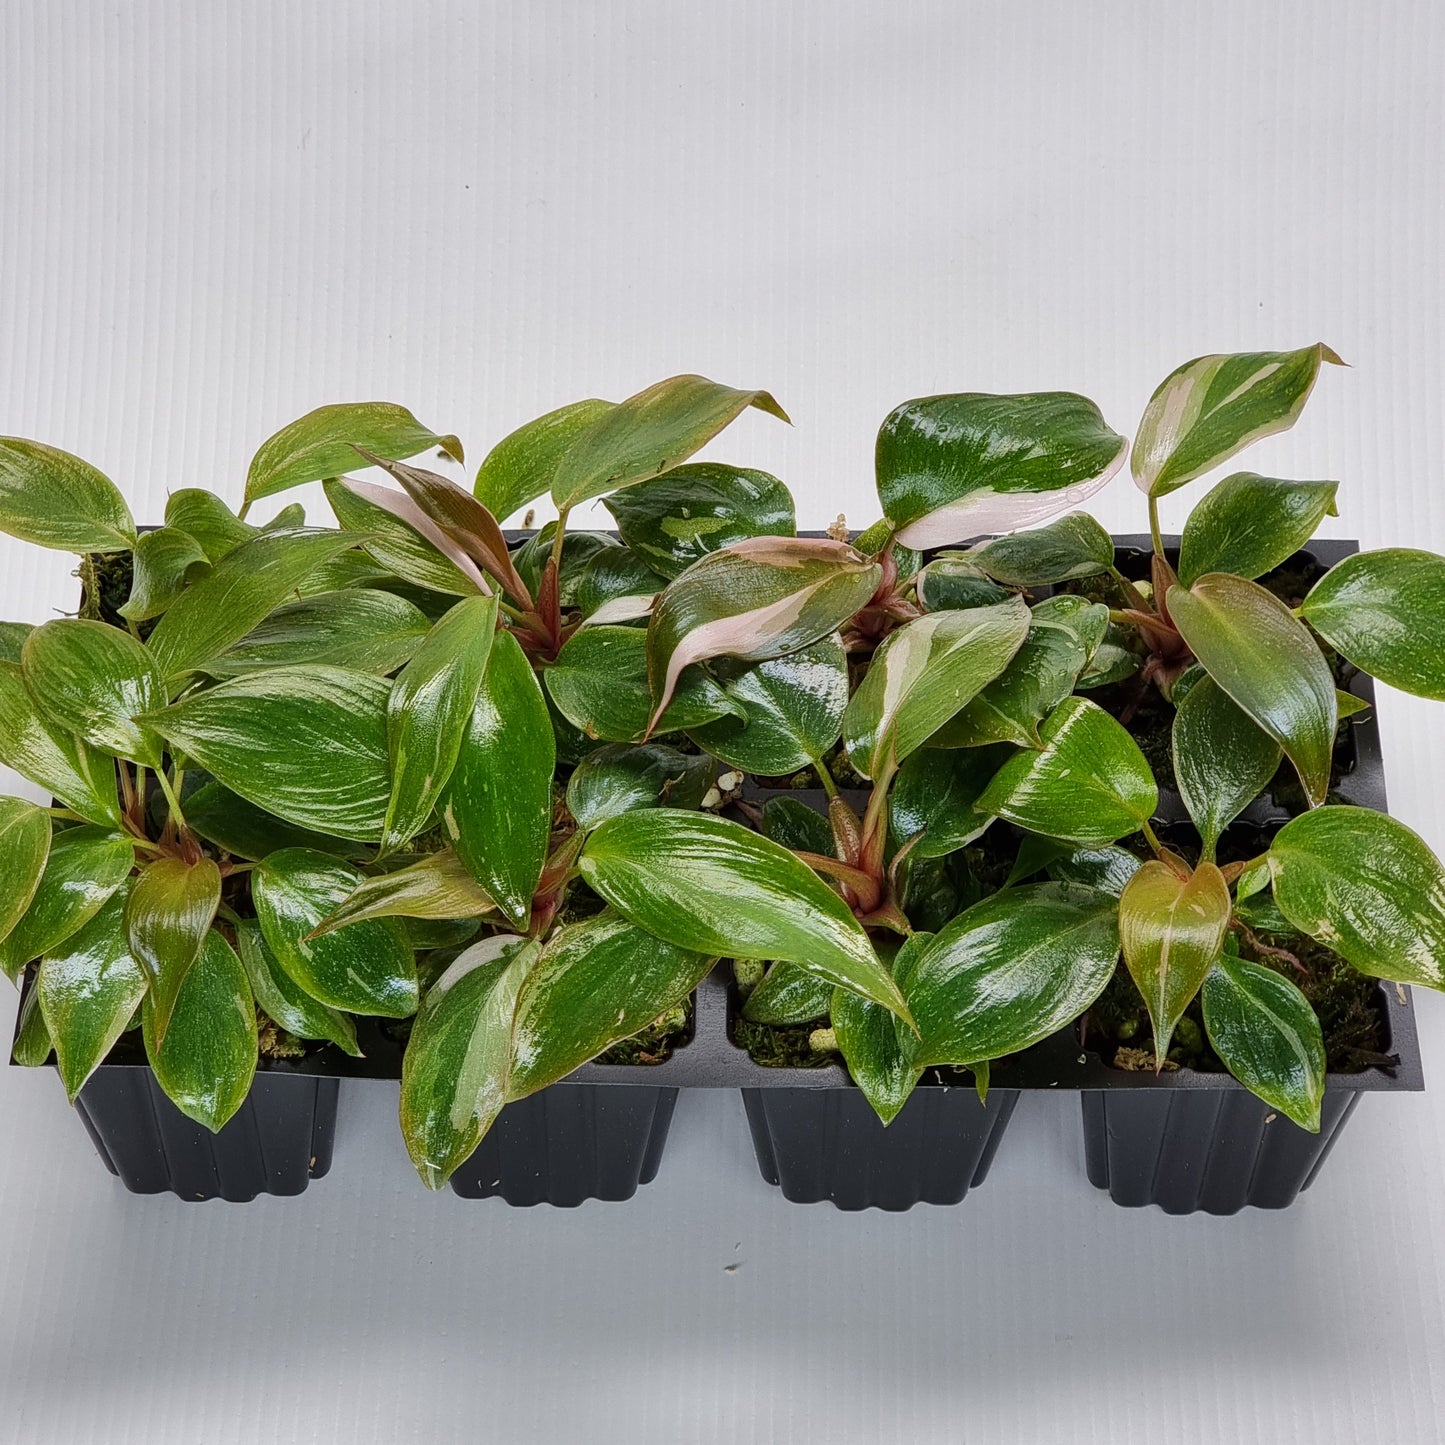 rare Philodendron pink princess marble for sale in Perth Australia